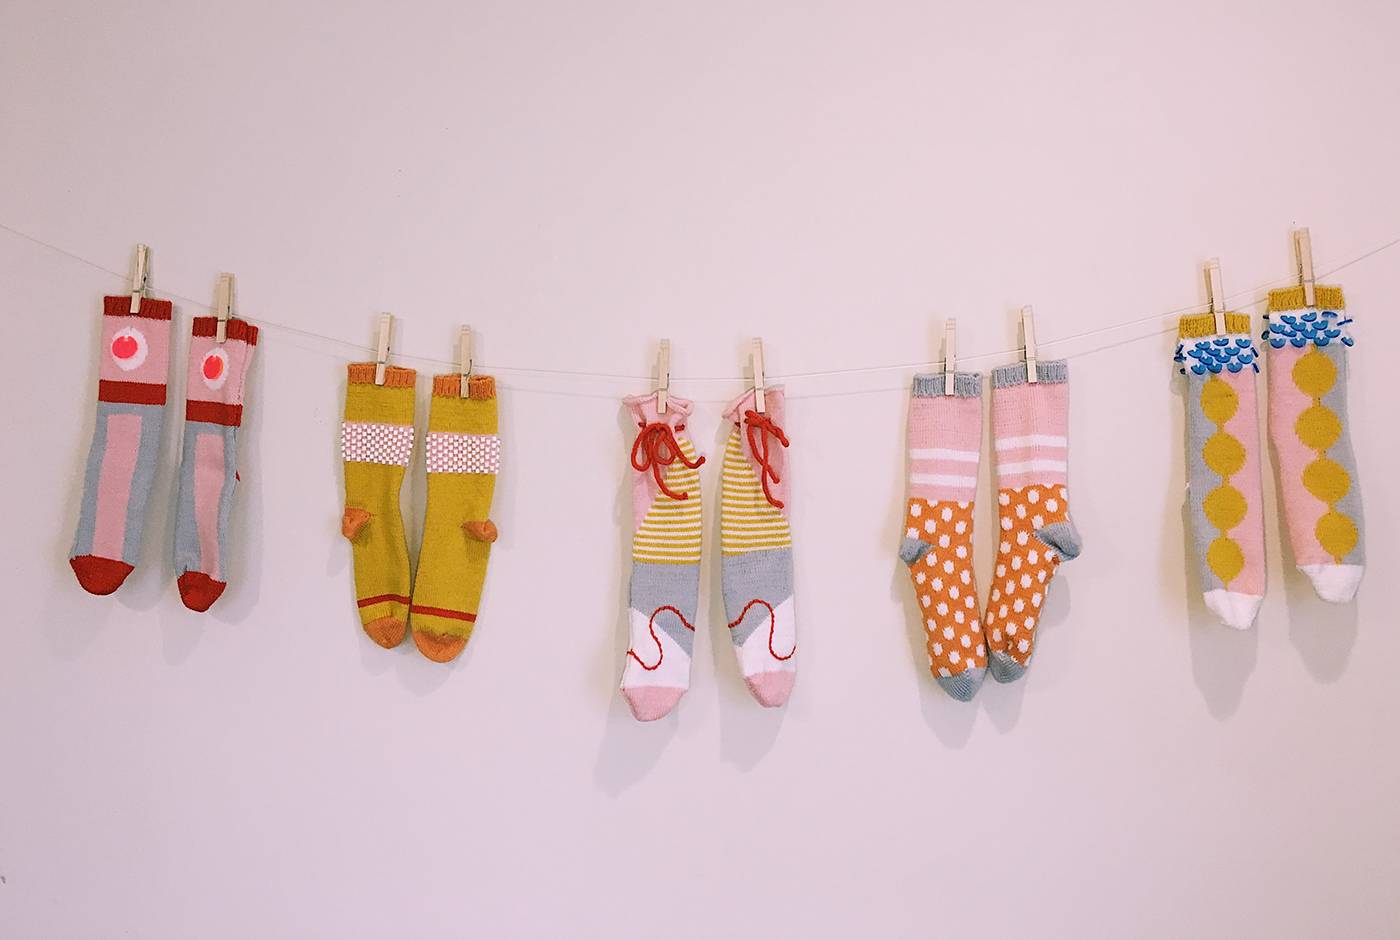 socks accessory design soft accessories Playful whimsical experimental bold colorful unconventional garment design